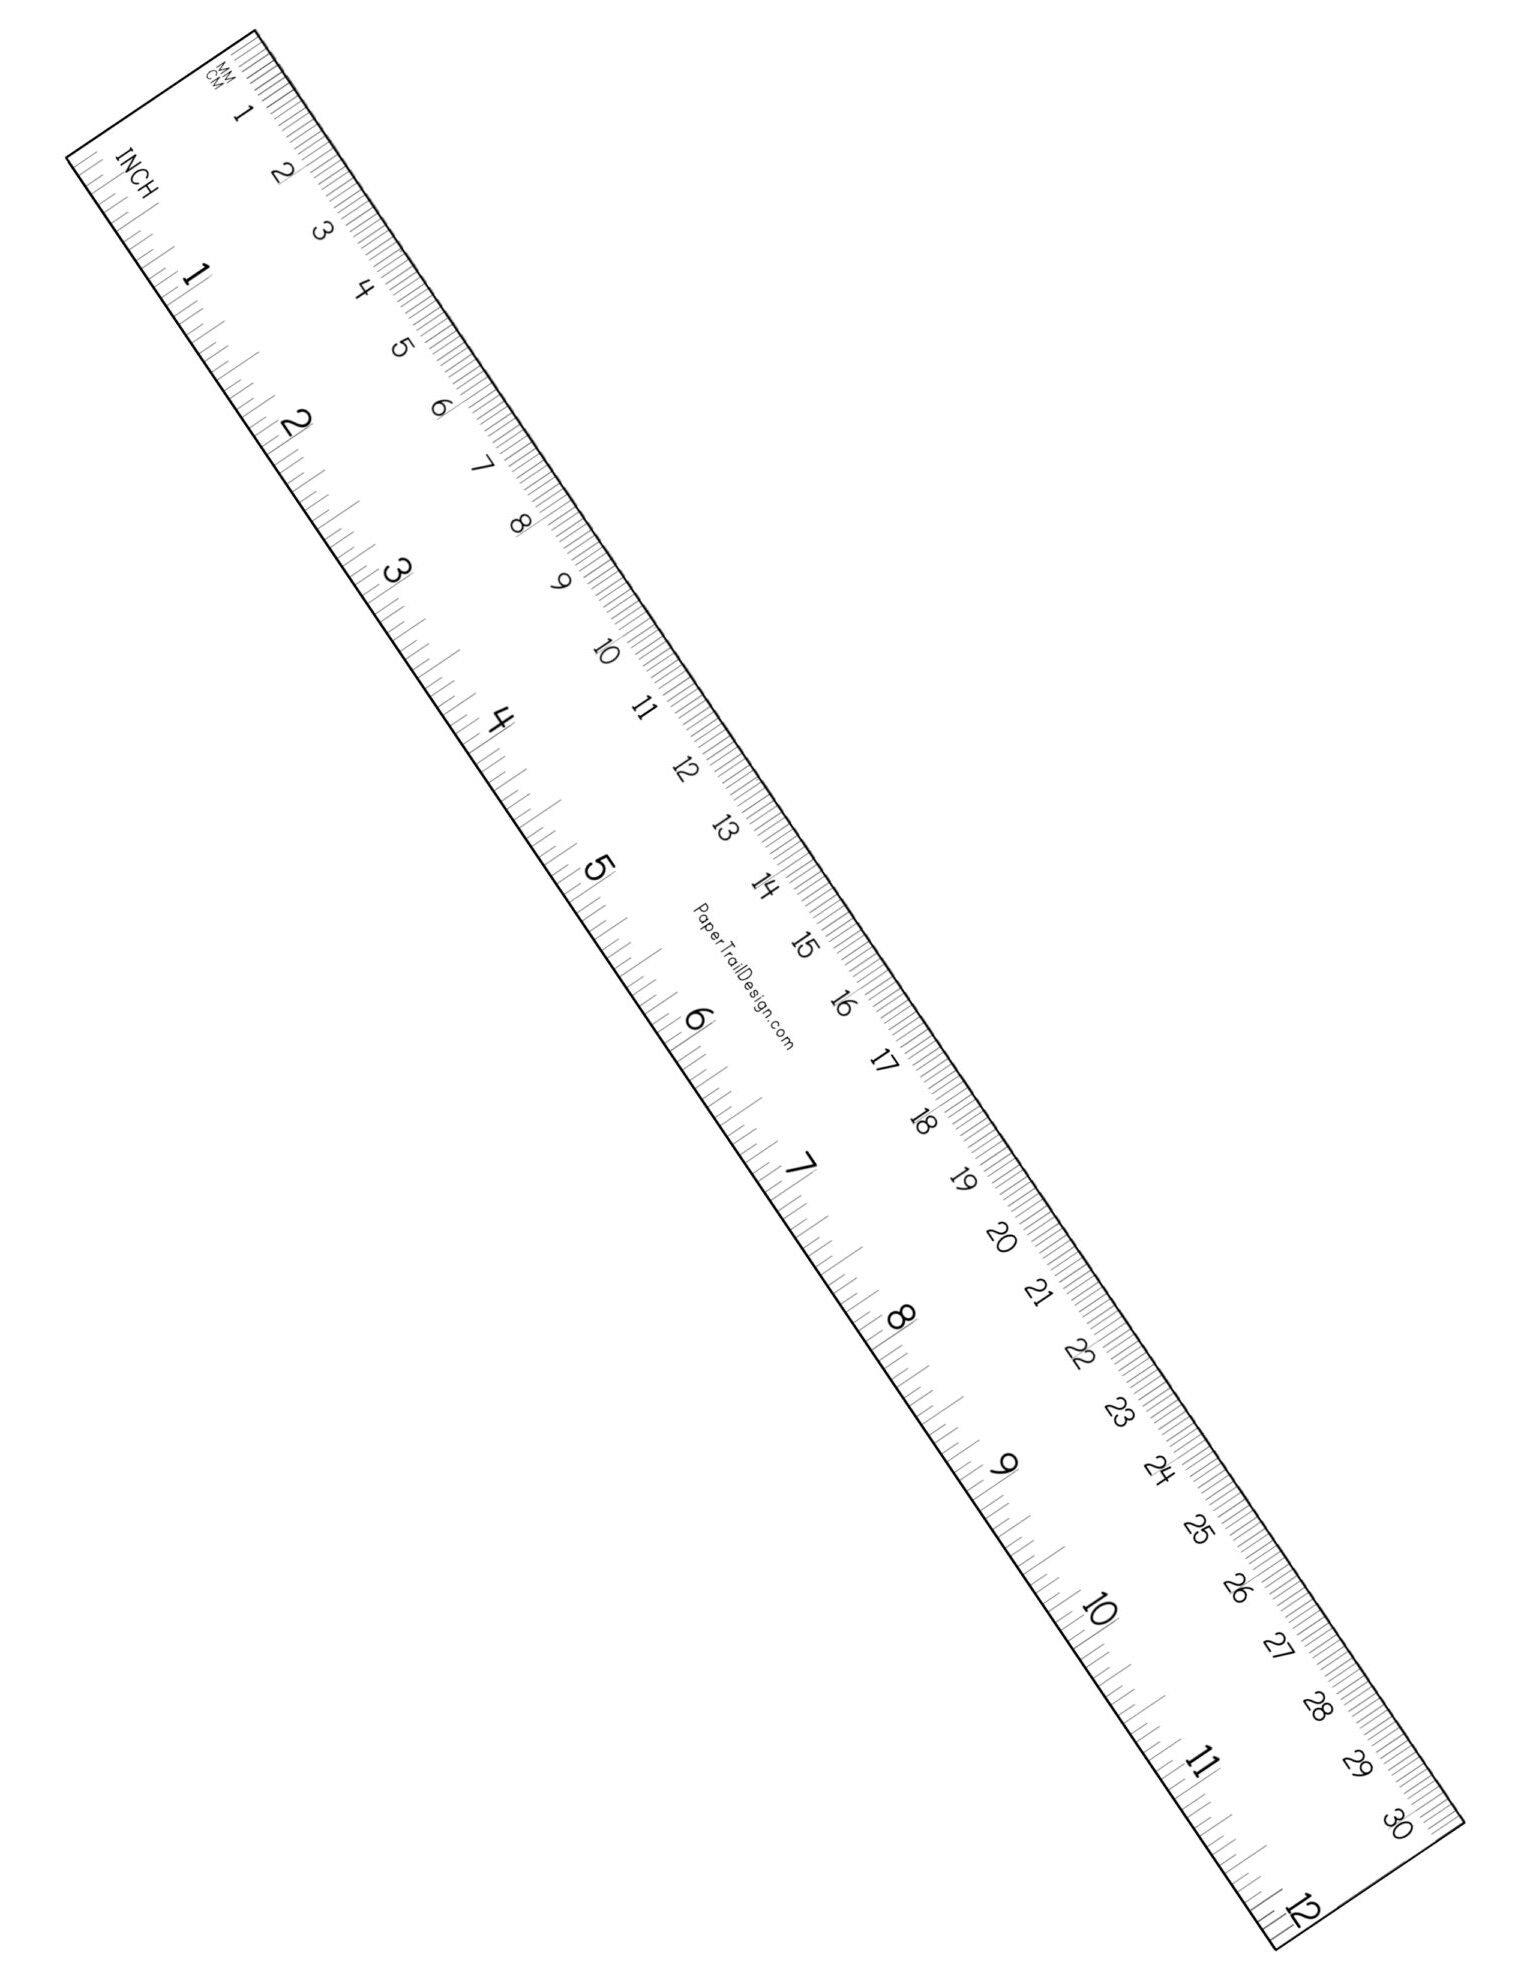 centimeter-and-inch-ruler-printable